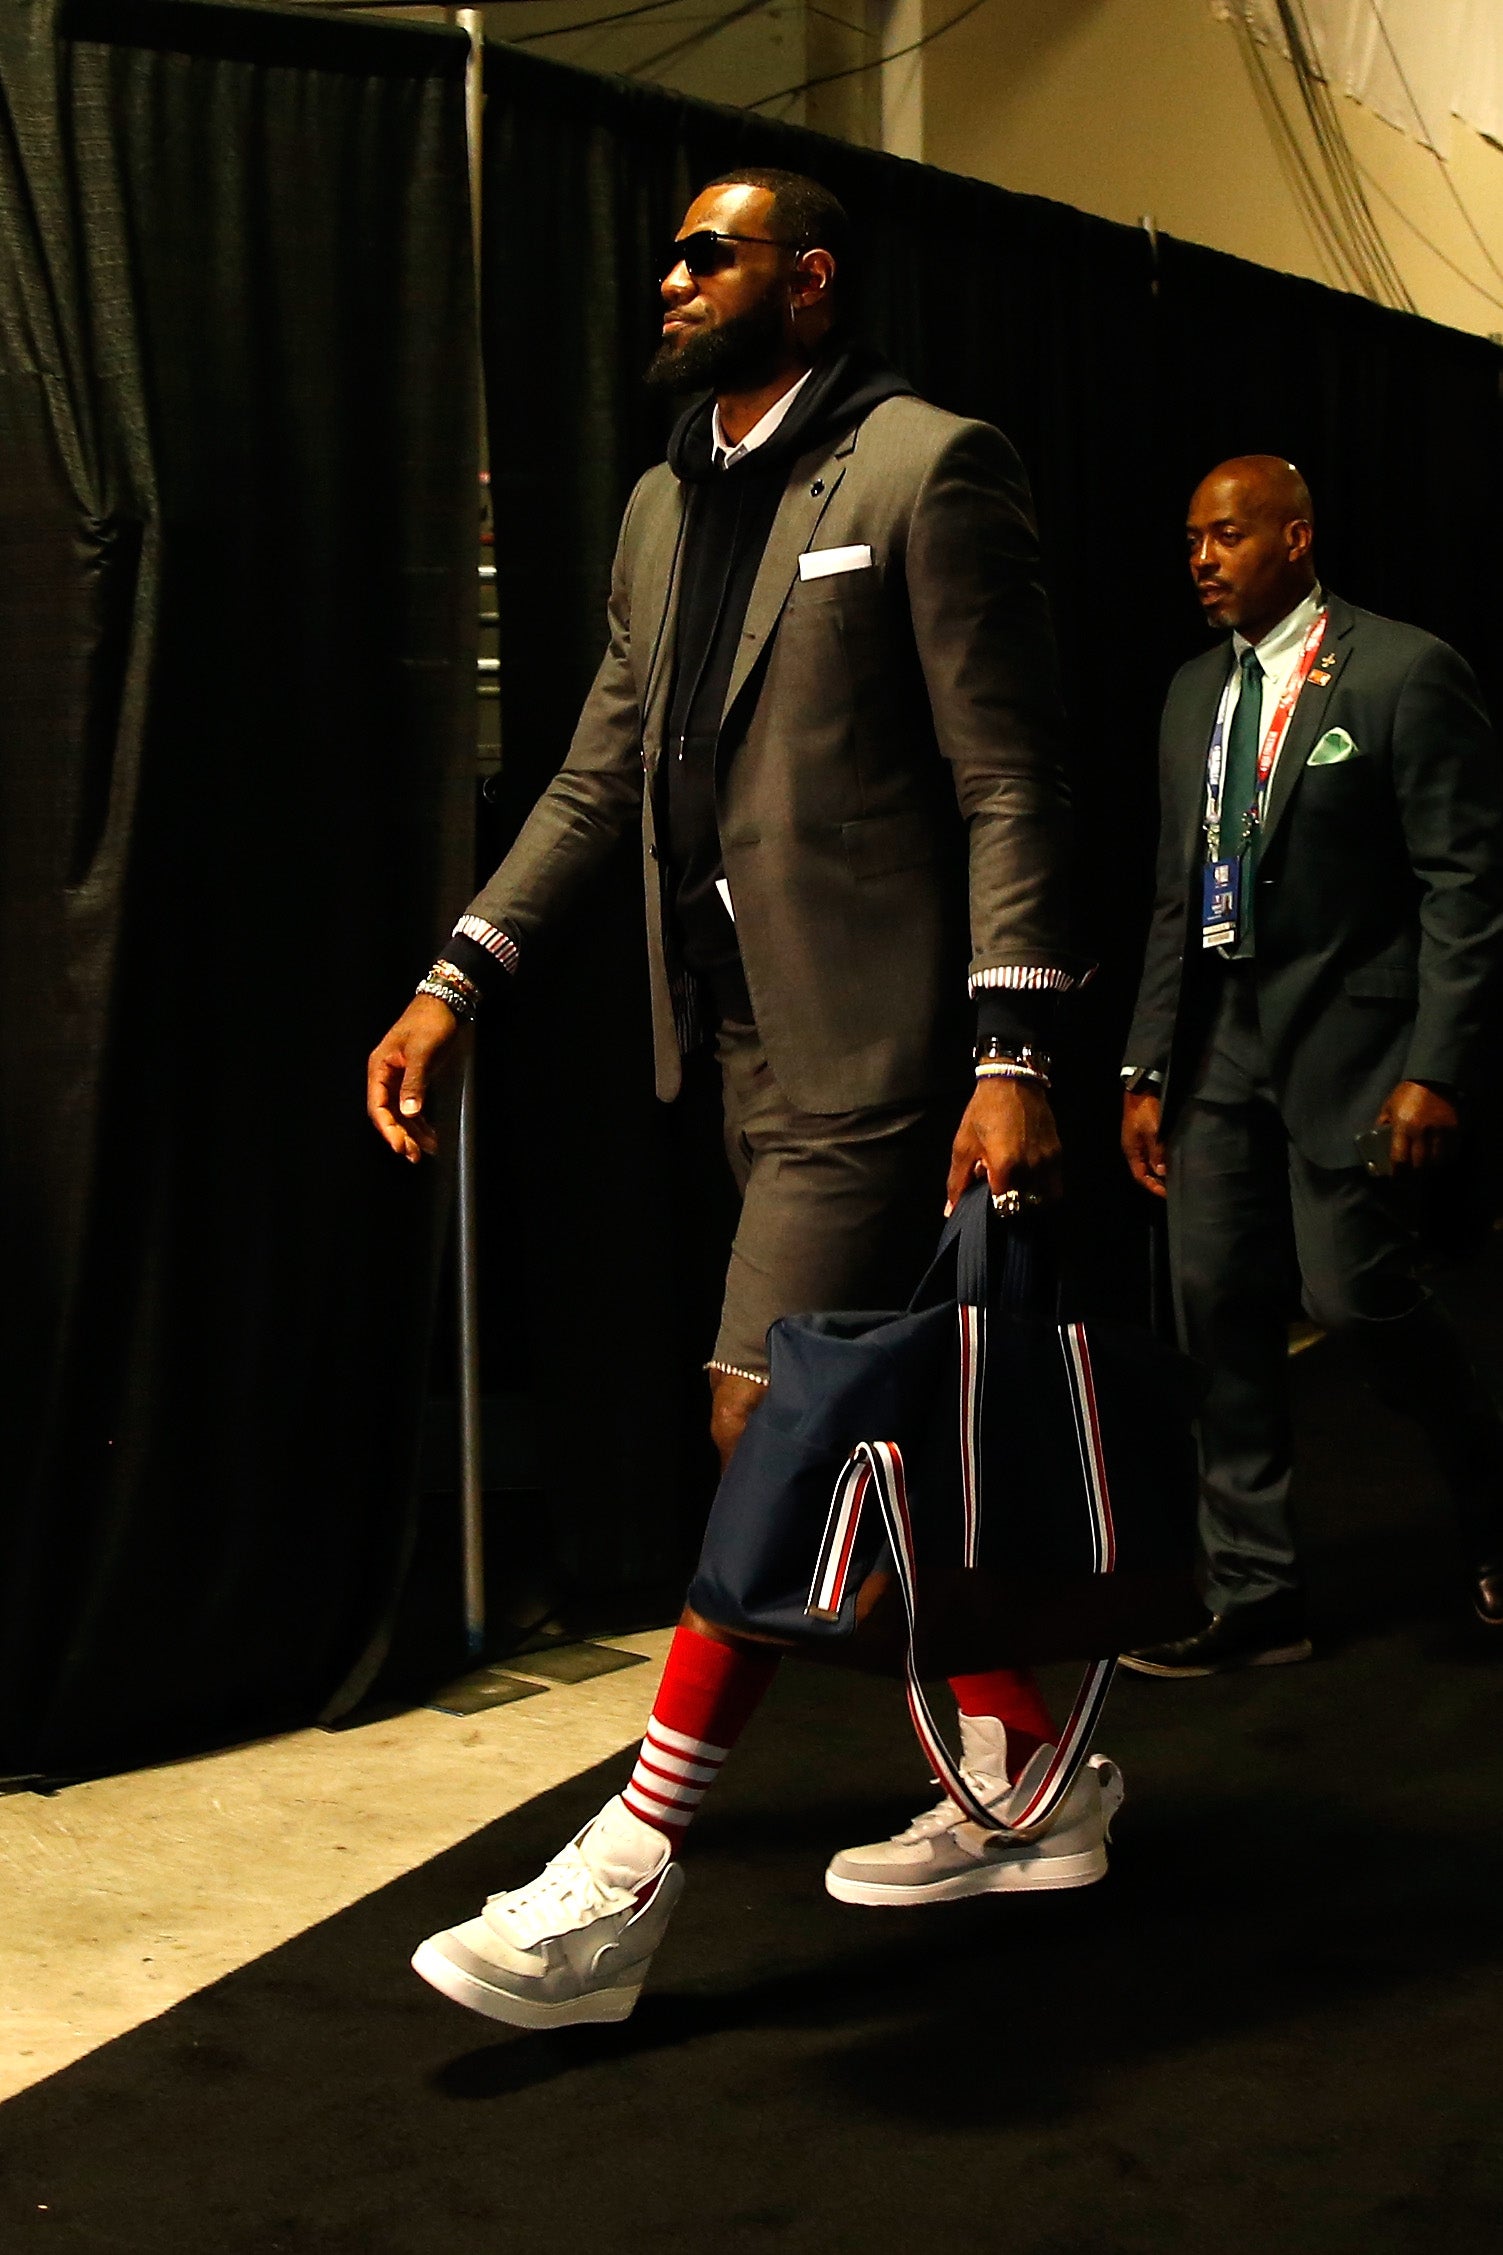 Mitchell S. Jackson’s Latest Book Is All About NBA Fashion